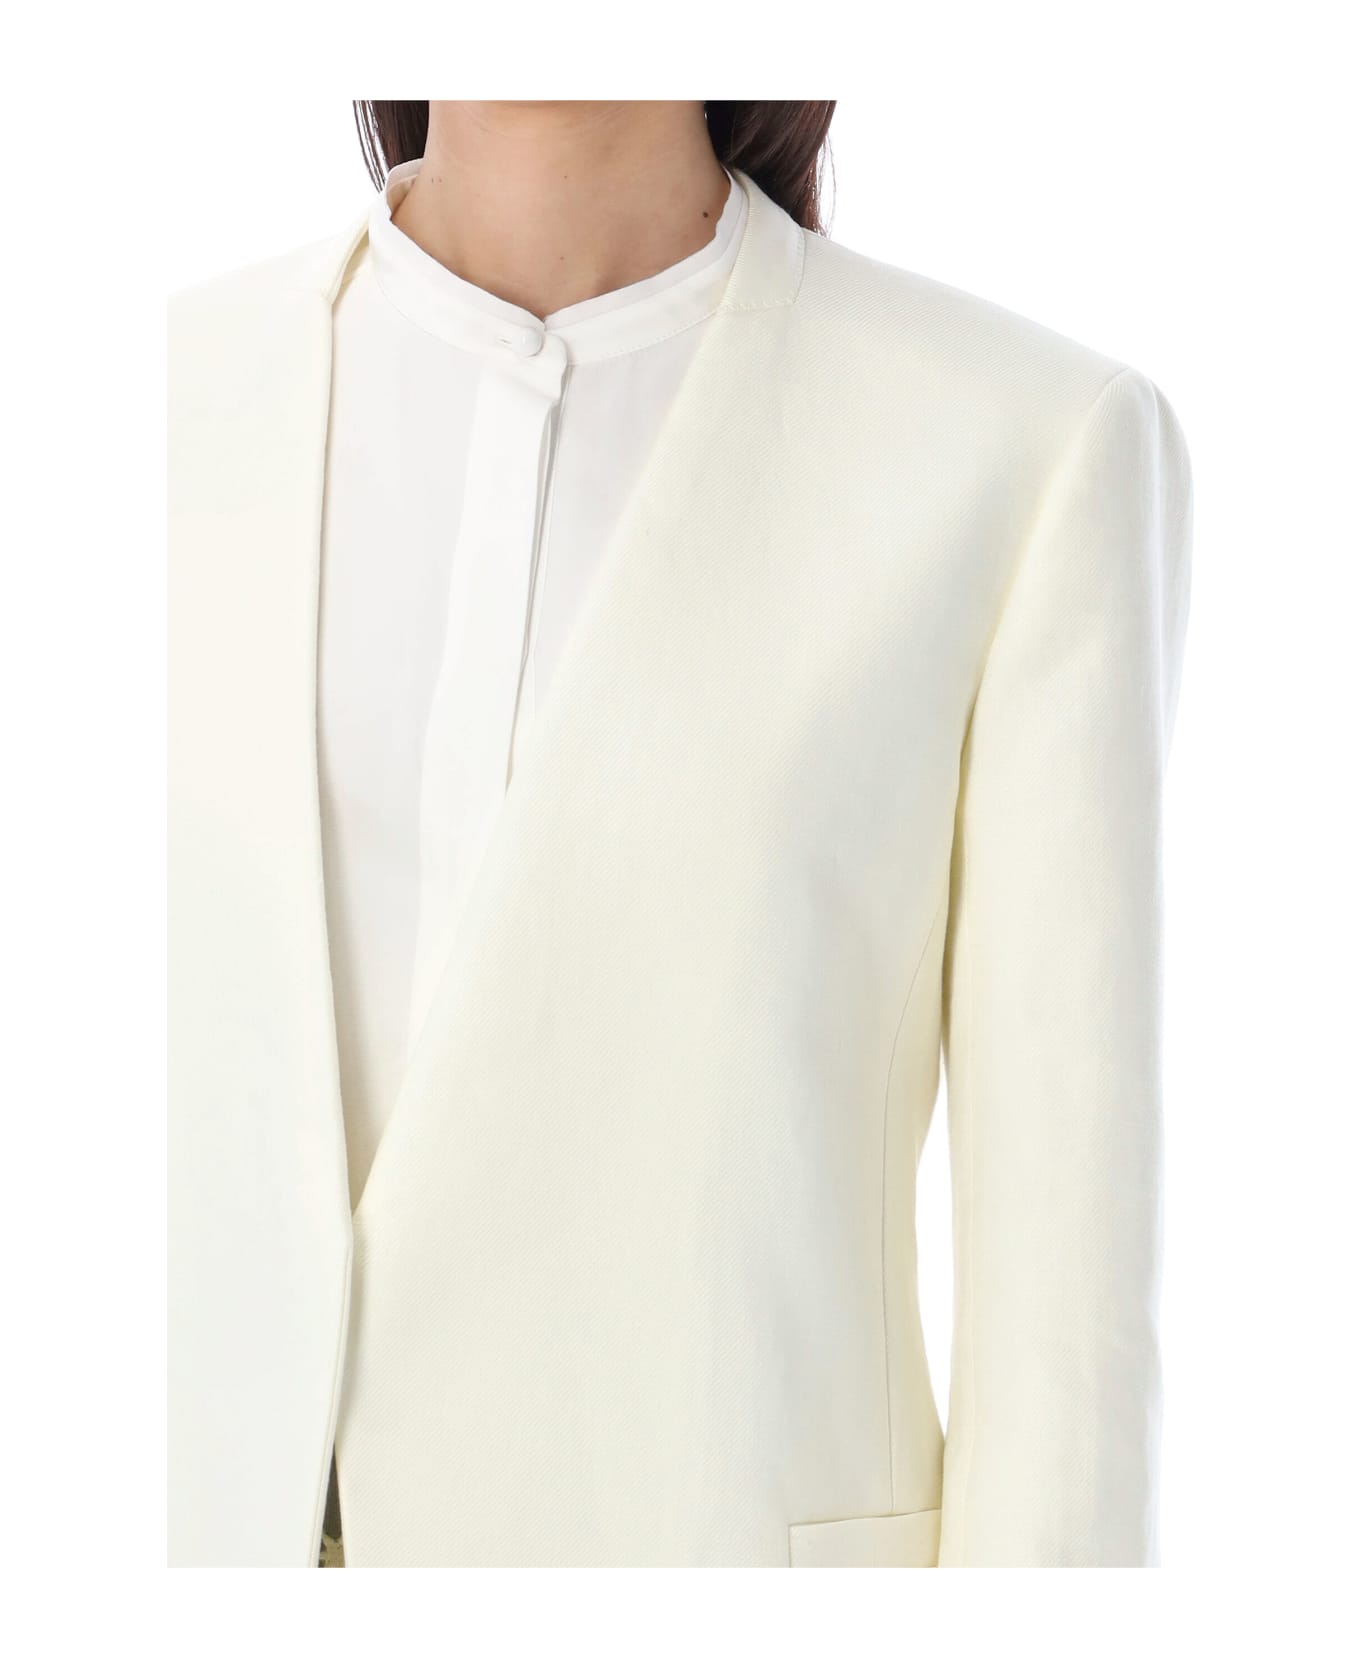 Chloé Buttonless Tailored Jacket - ICONIC MILK